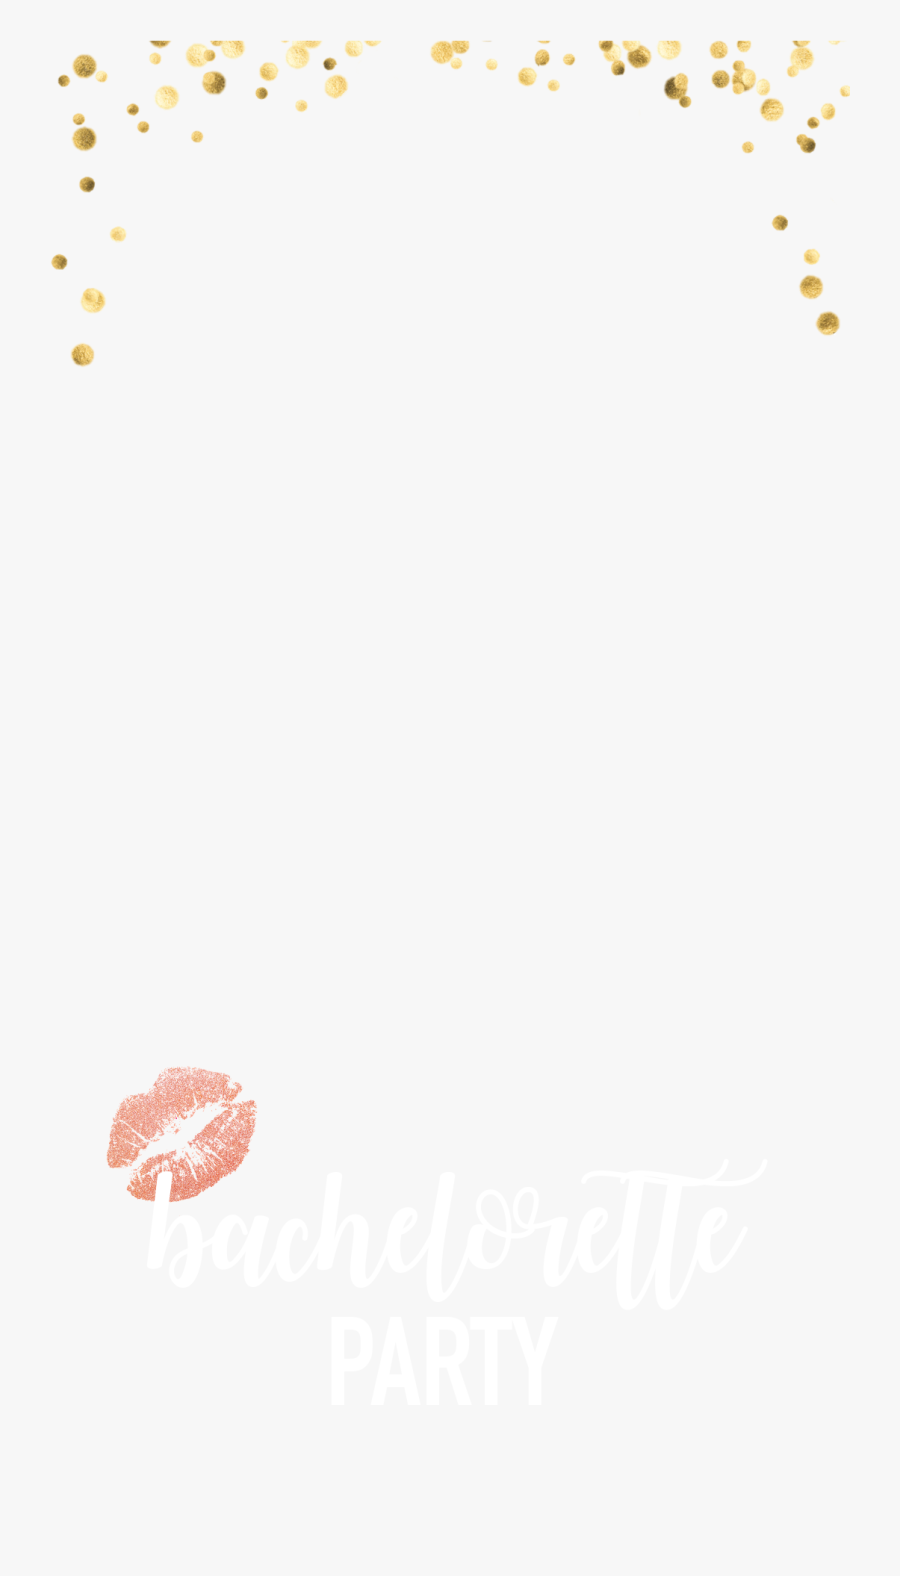 Transparent Gold Confetti Background Png - Gold Confetti Transparent Background, Transparent Clipart